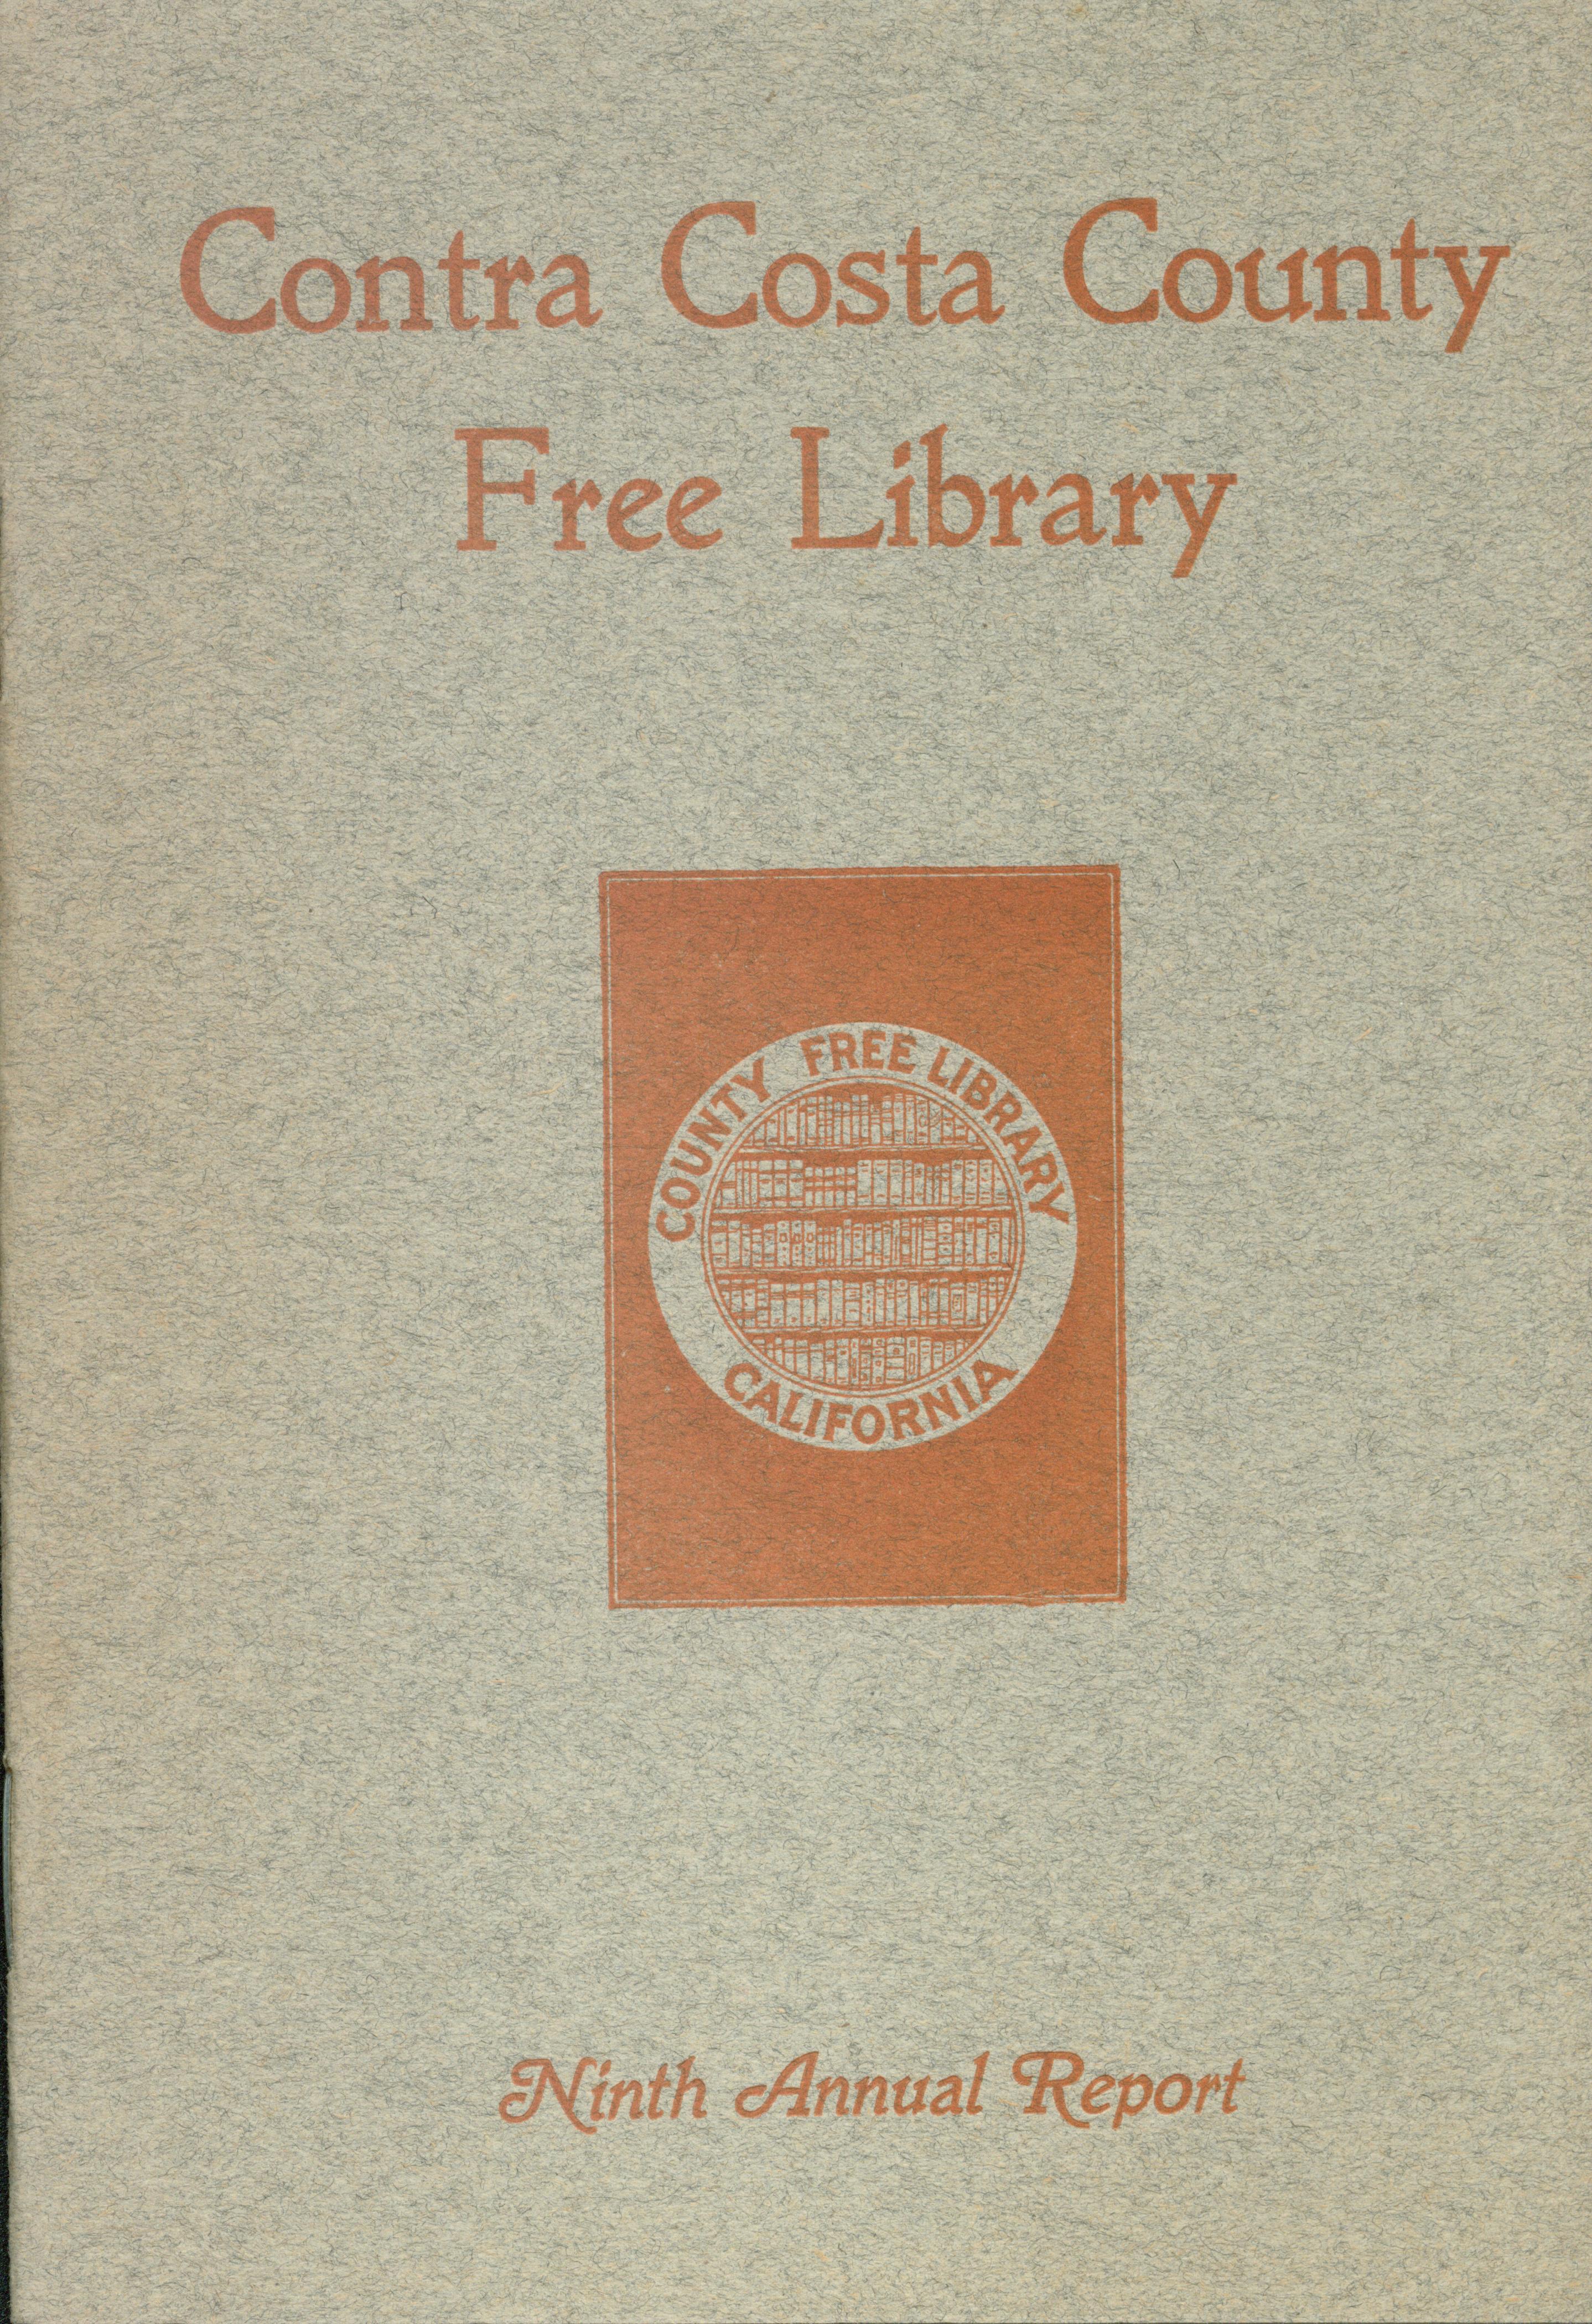 Front shows the Contra Costa County Free Library logo